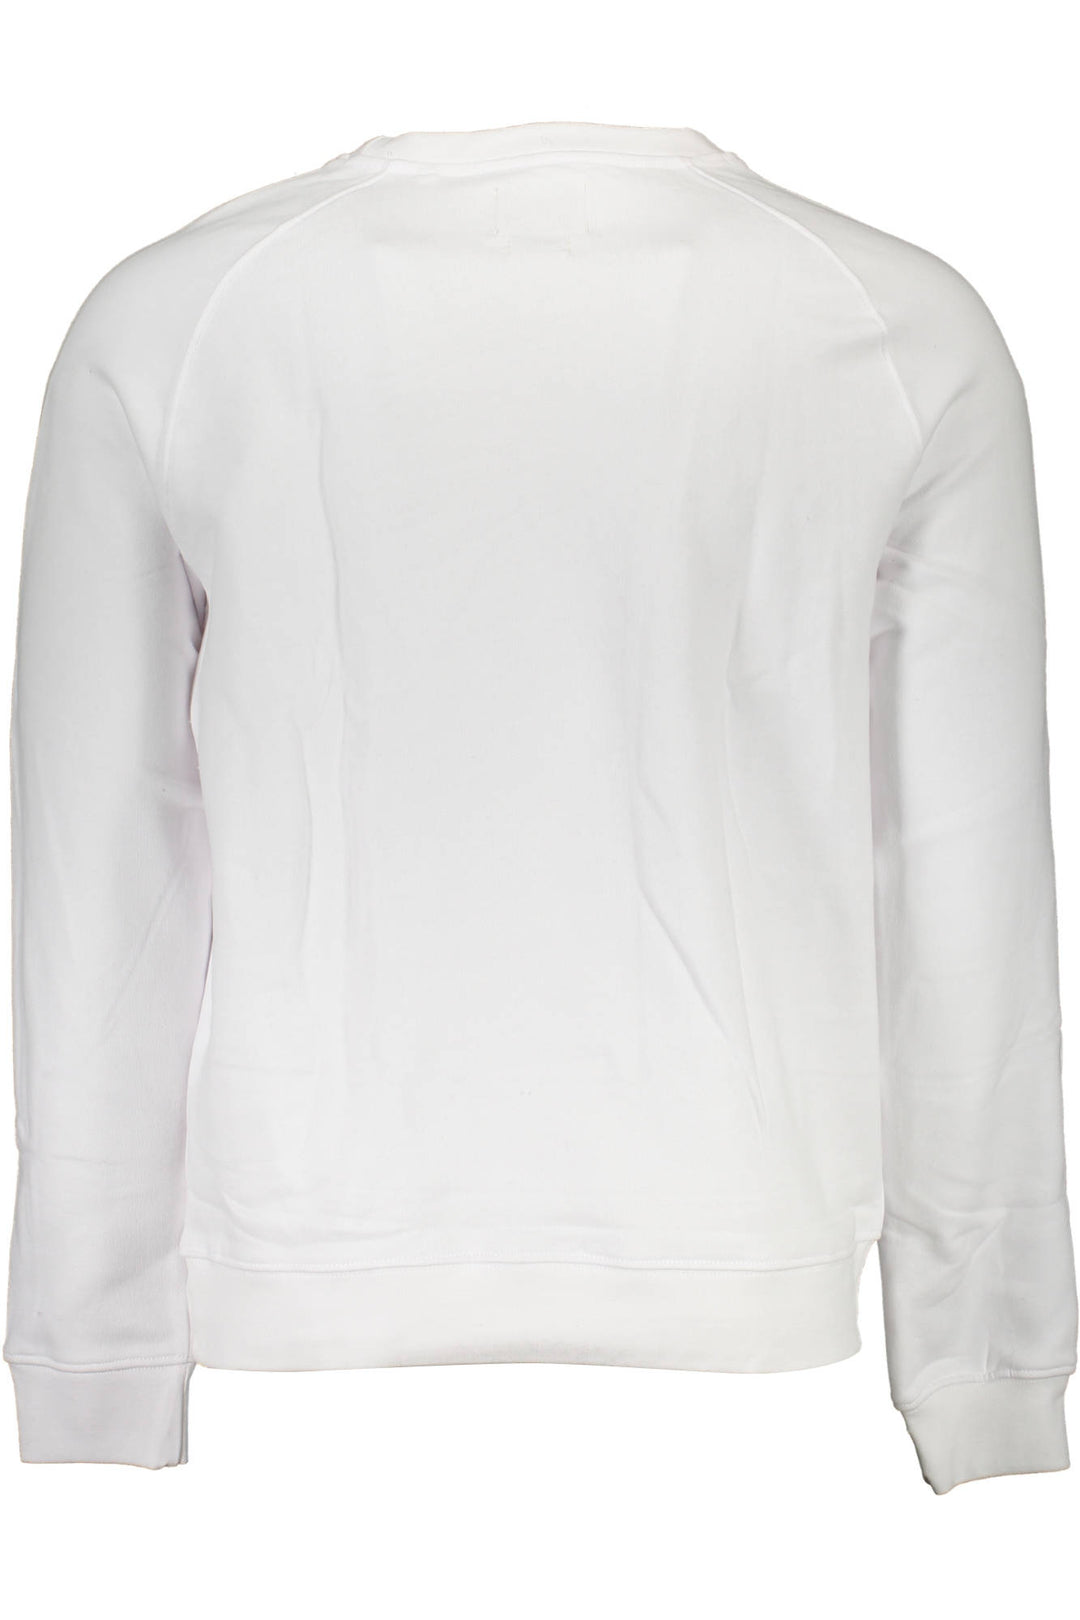 GUESS JEANS SWEATSHIRT WITHOUT ZIP MAN WHITE